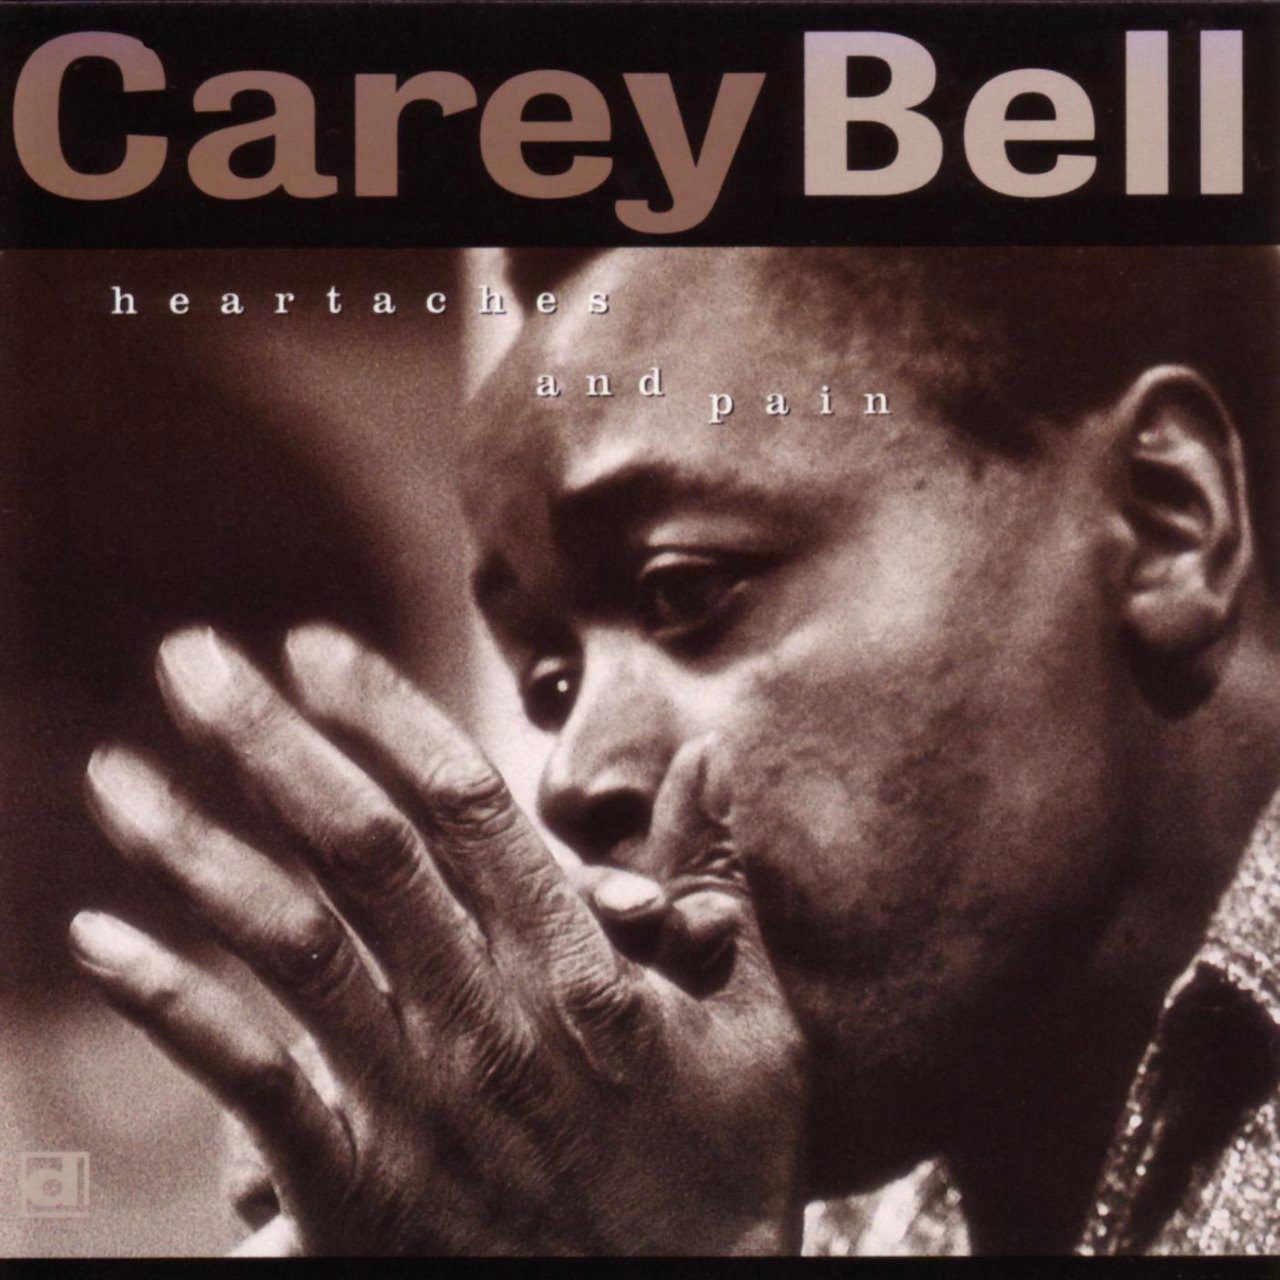 Carey Bell – Heartaches And Pain cover album